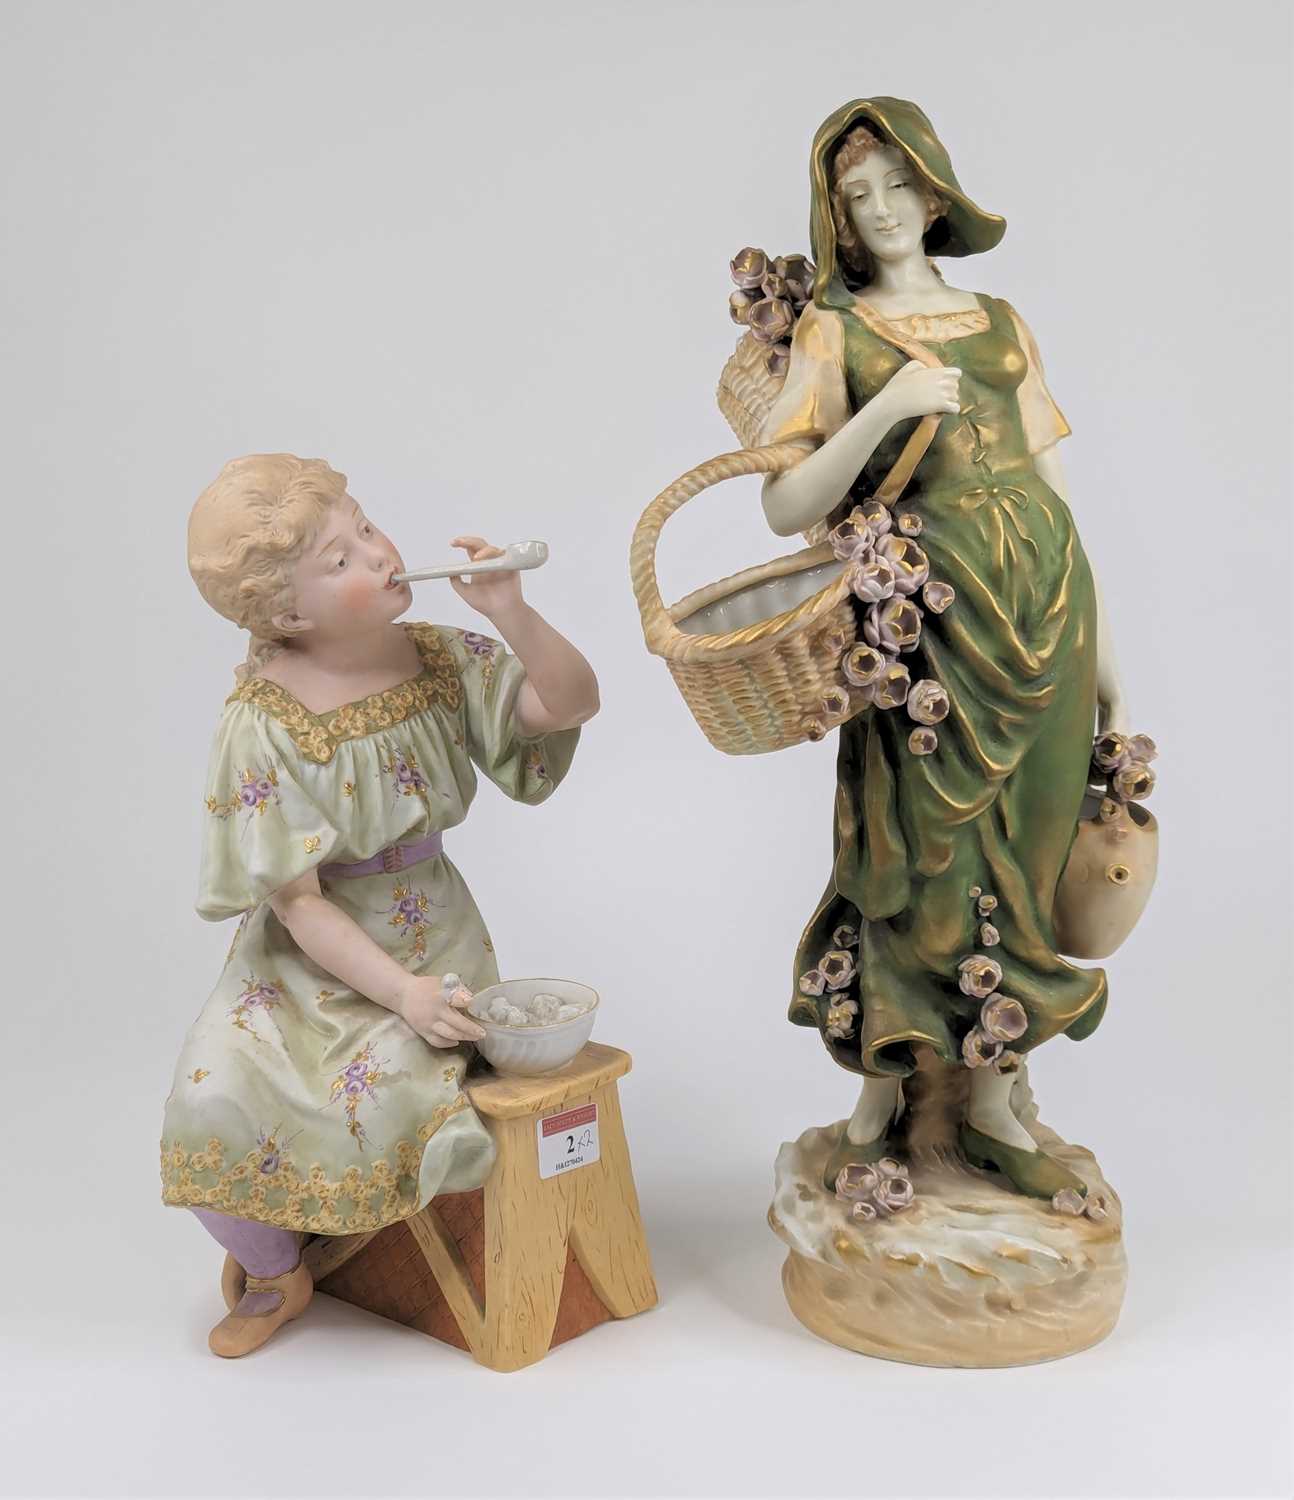 An Austrian porcelain figure of a lady, height 45cm, together with a Victorian bisque porcelain